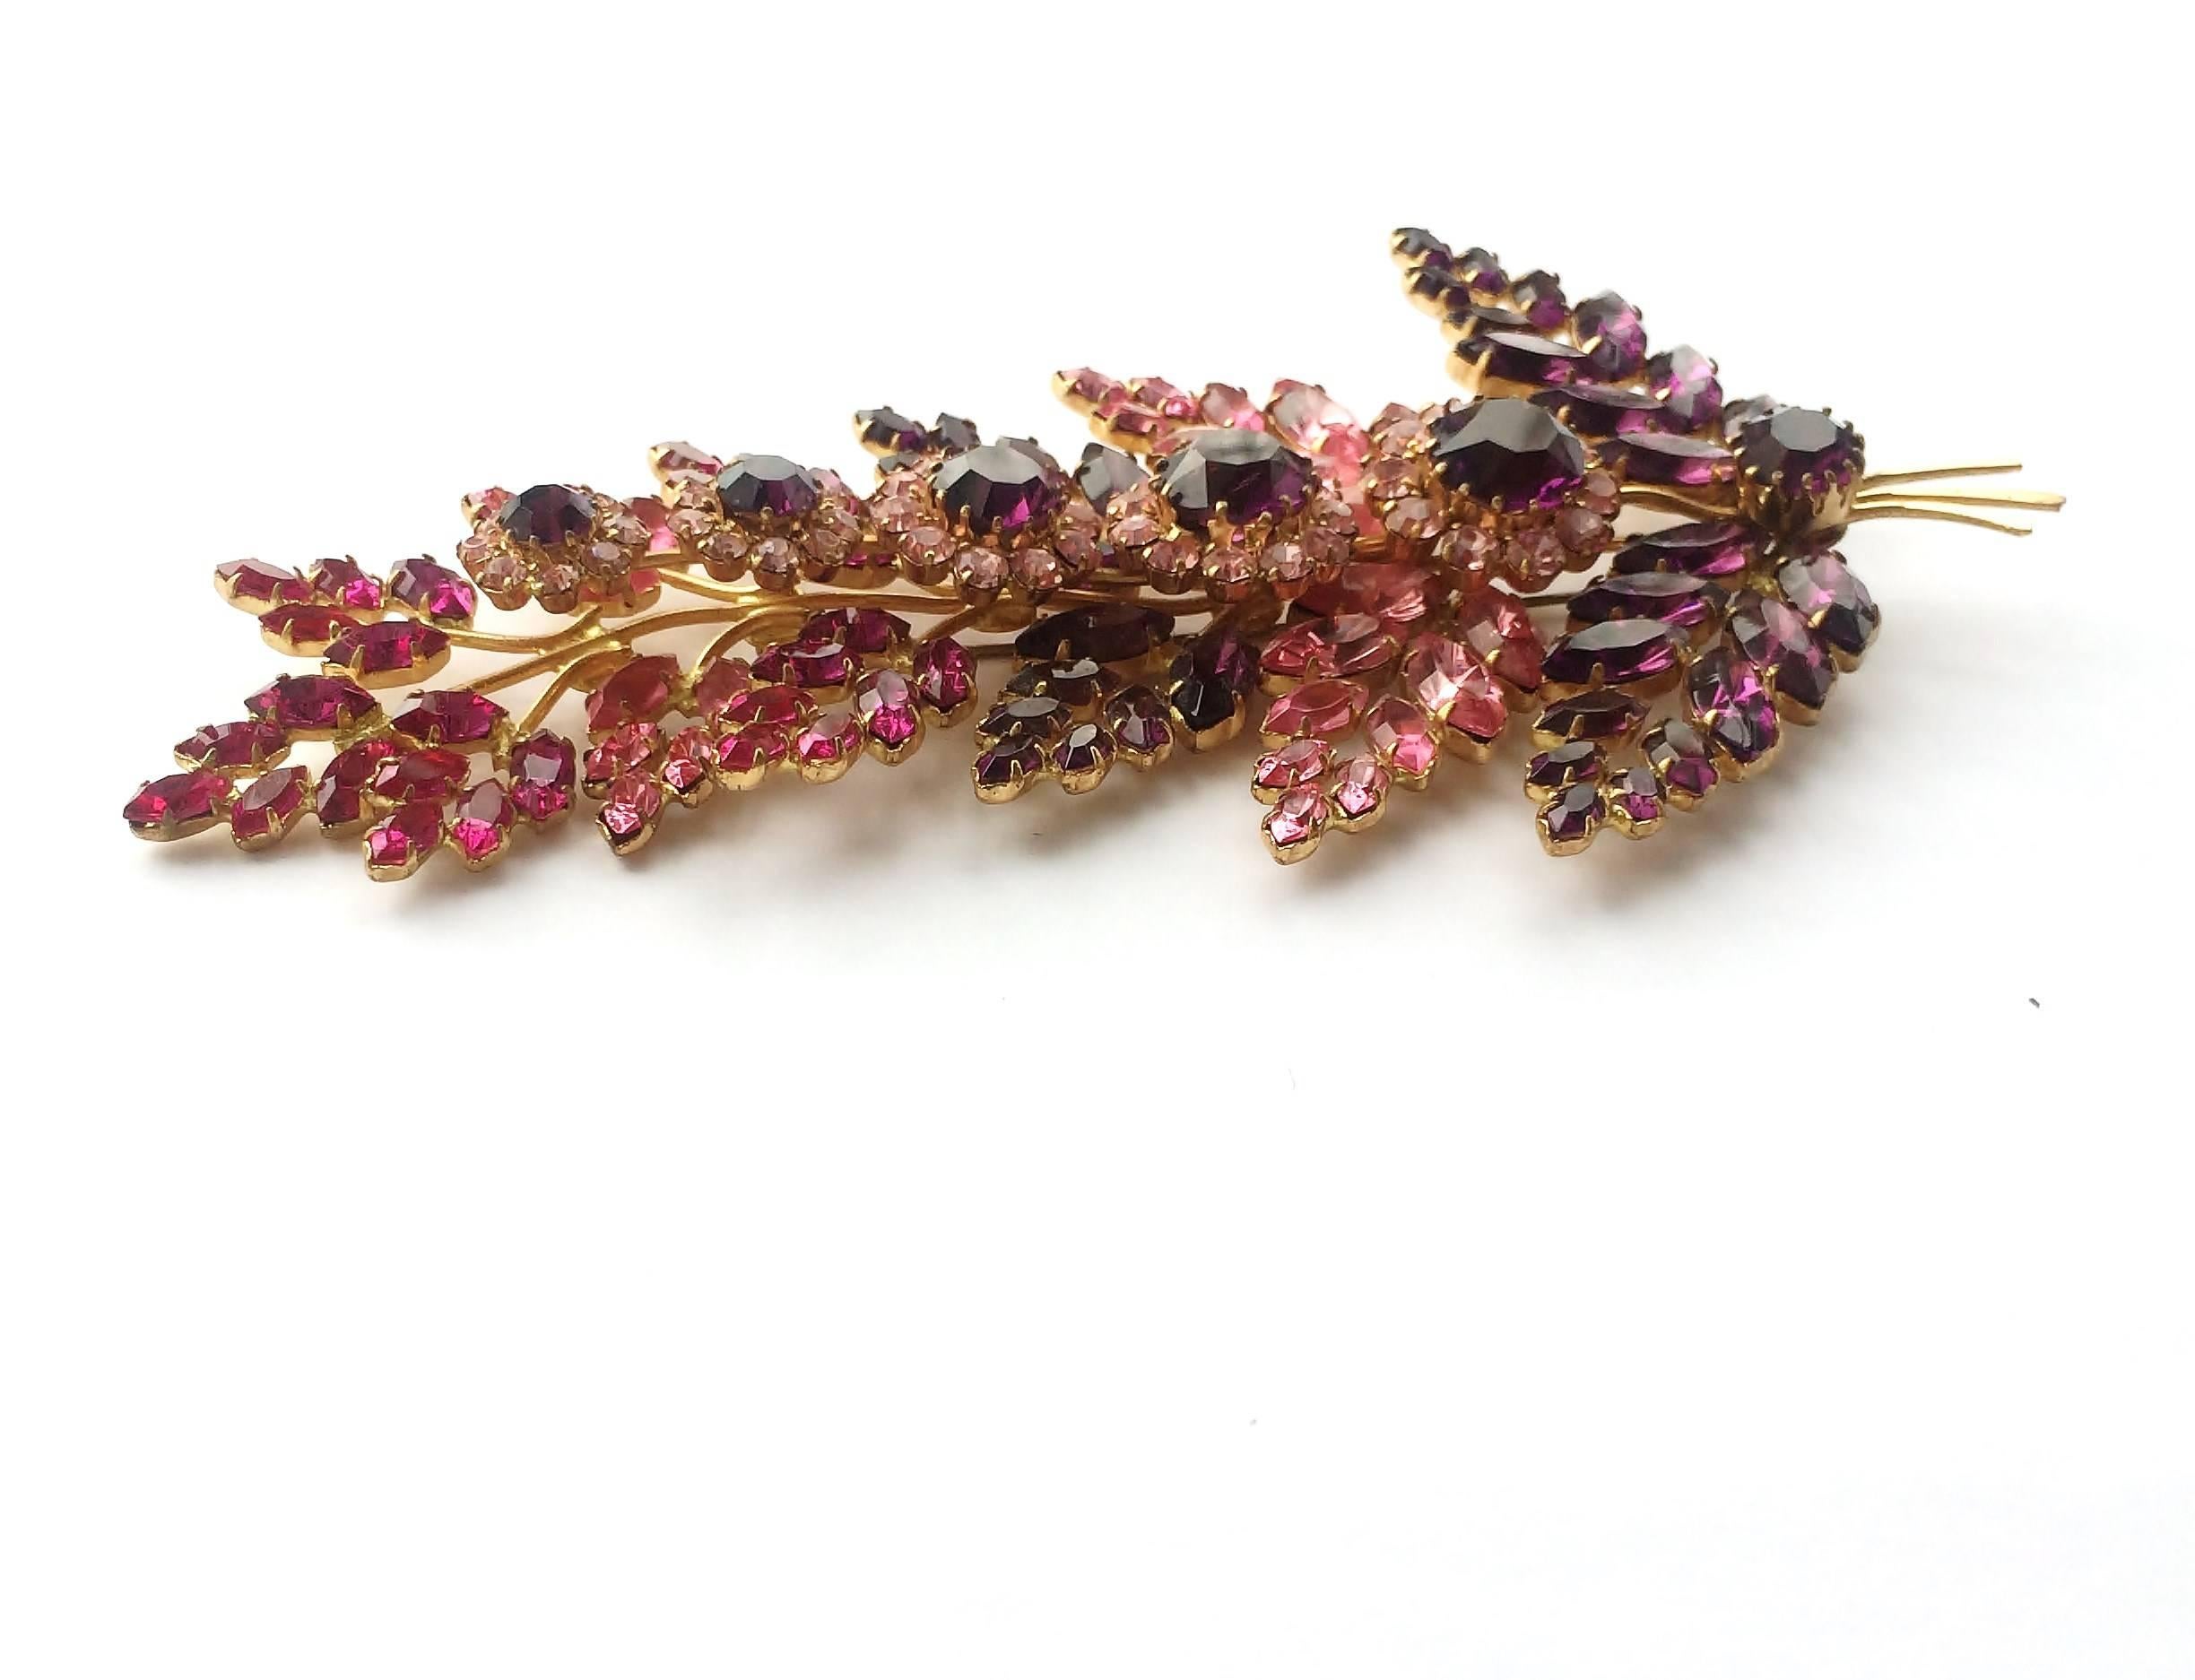 This ravishing very large brooch is made from highest quality Austrian pastes, in amethyst, pale pink and a vibrant, 'shocking' pink colours, set in a soft gold setting. The 'flowers' are placed above the 'leaves' on a seperate 'stem', making it